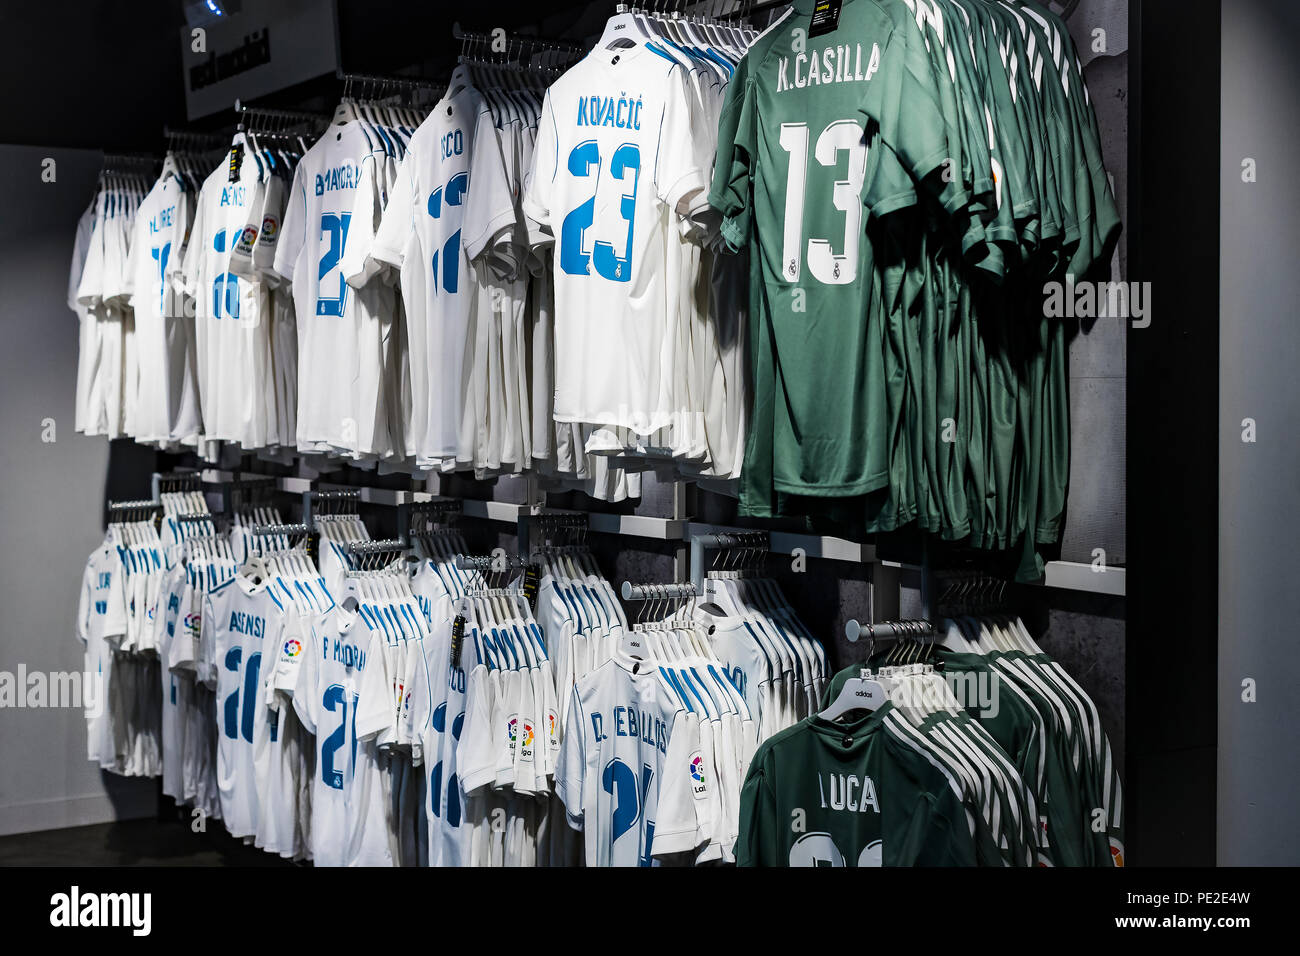 MADRID, SPAIN - 25 MARCH, 2018: Official clothing store and sports  attributes for fans Real Madrid Football Club Stock Photo - Alamy